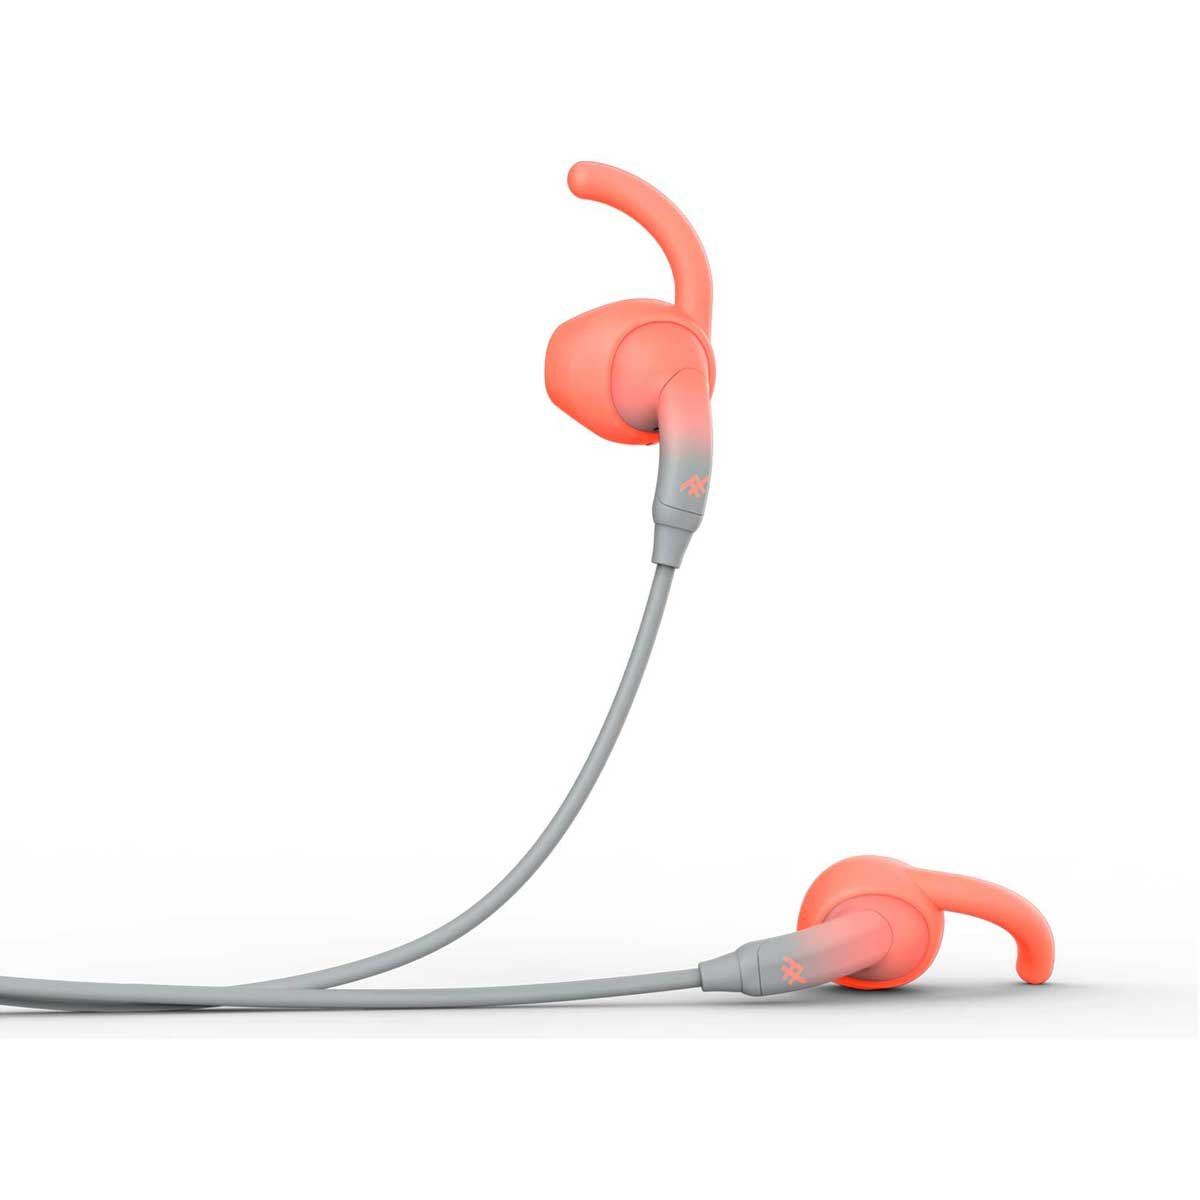 Audífonos In Ear Bluetooth Tone Gris/ Coral Ifrogz